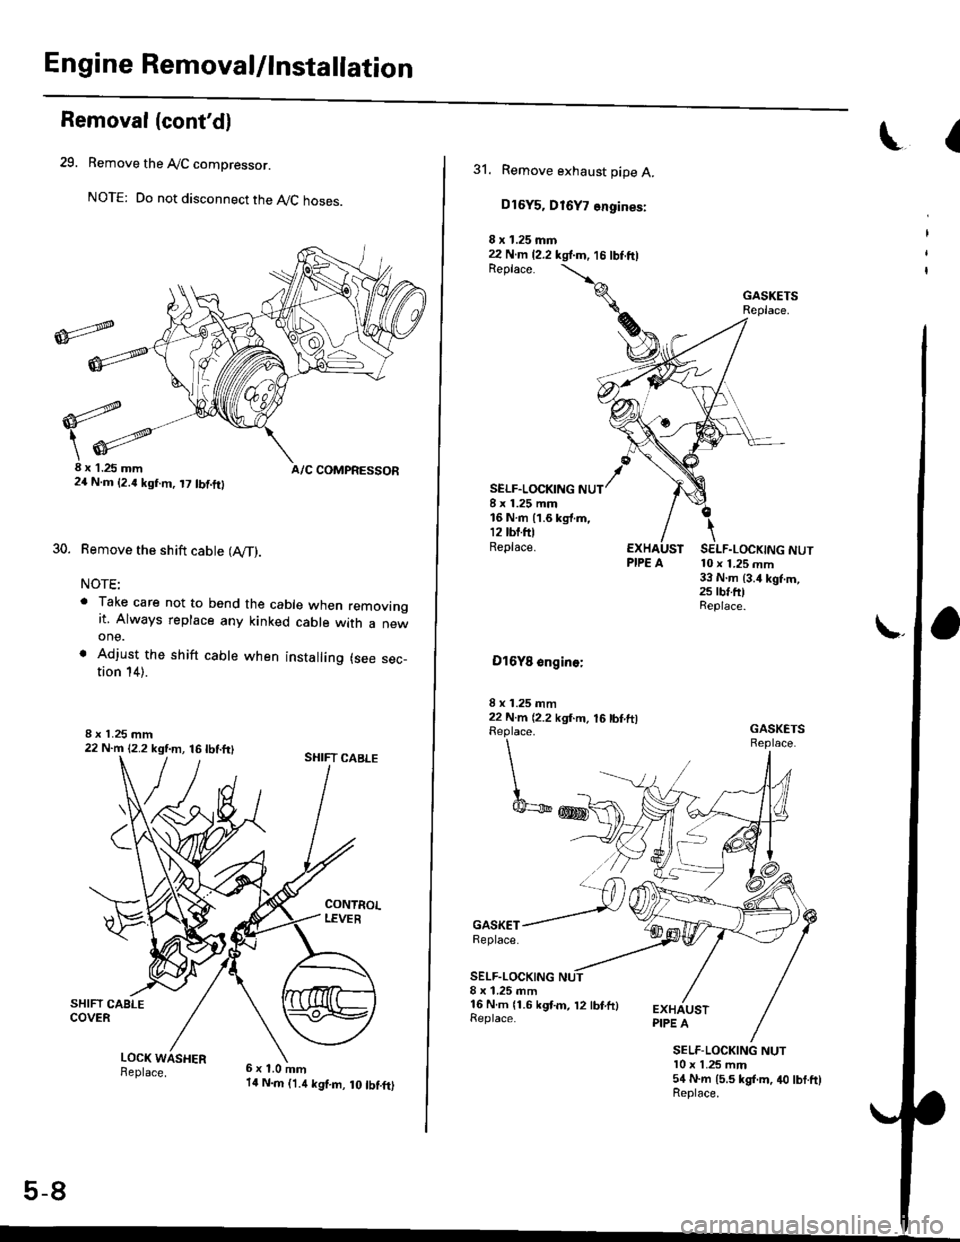 HONDA CIVIC 1996 6.G Owners Manual Engine Removal/lnstallation
Removal(contdl
29. Remove the AyC compressor.
NOTE: Do not disconnect the AyC hoses.
30.
8x 1.25 mm A/C COMPRESSOR24 N.m (2.{ kgf.m, t7 tbtft}
Remove the shift cable (IV